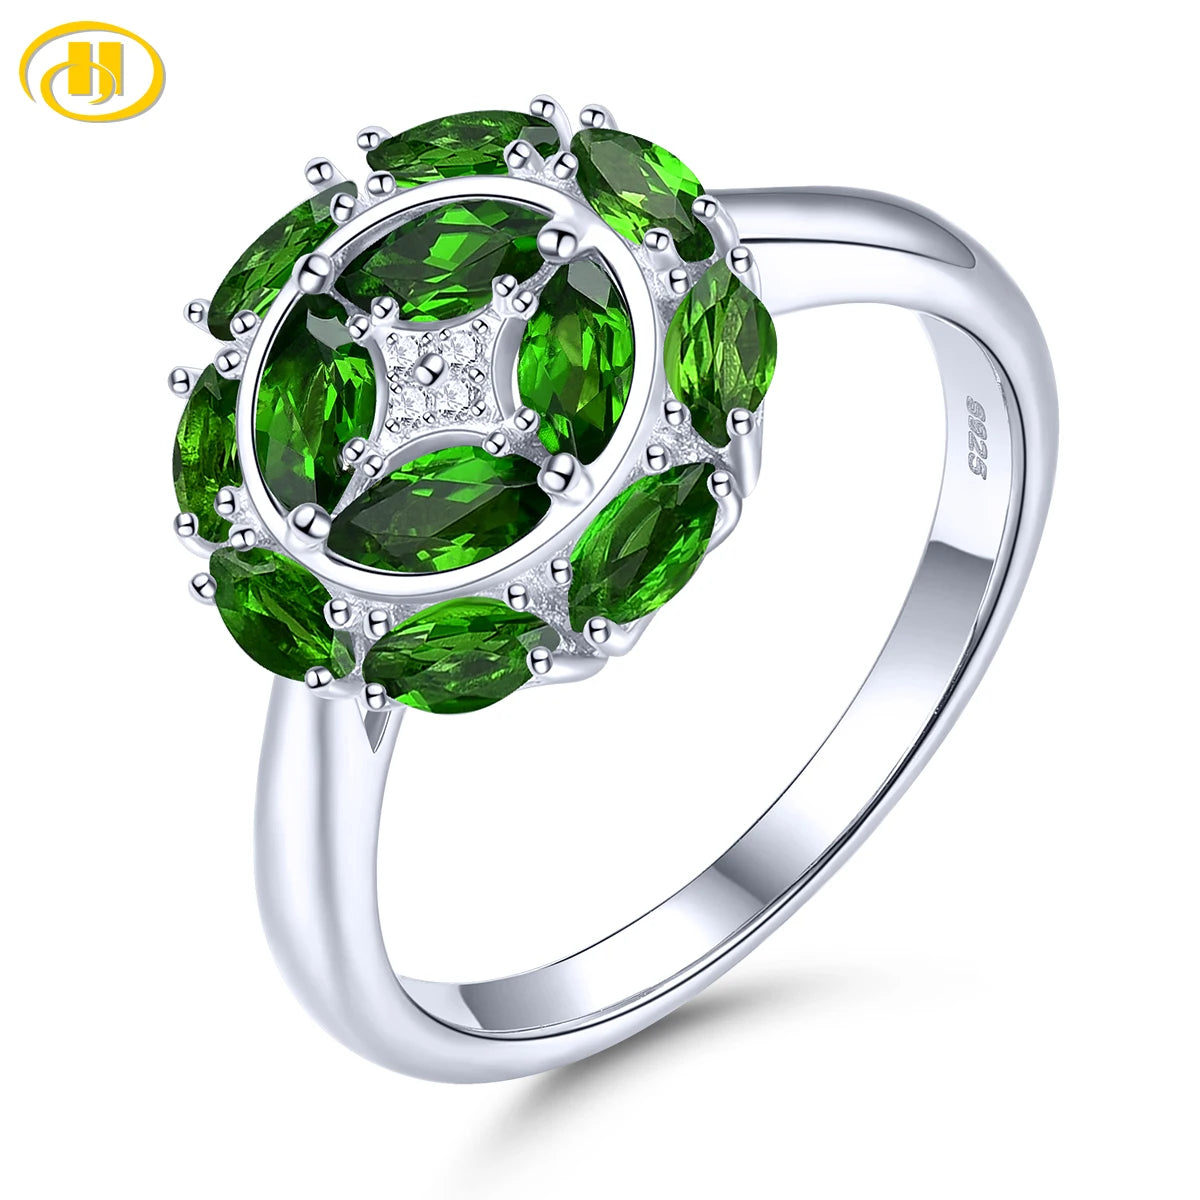 Natural Chrome Diopside Sterling Silver Rings 1.5 Carats Genuine Deep Green Gemstone Women Classic Design Jewelry Style S925